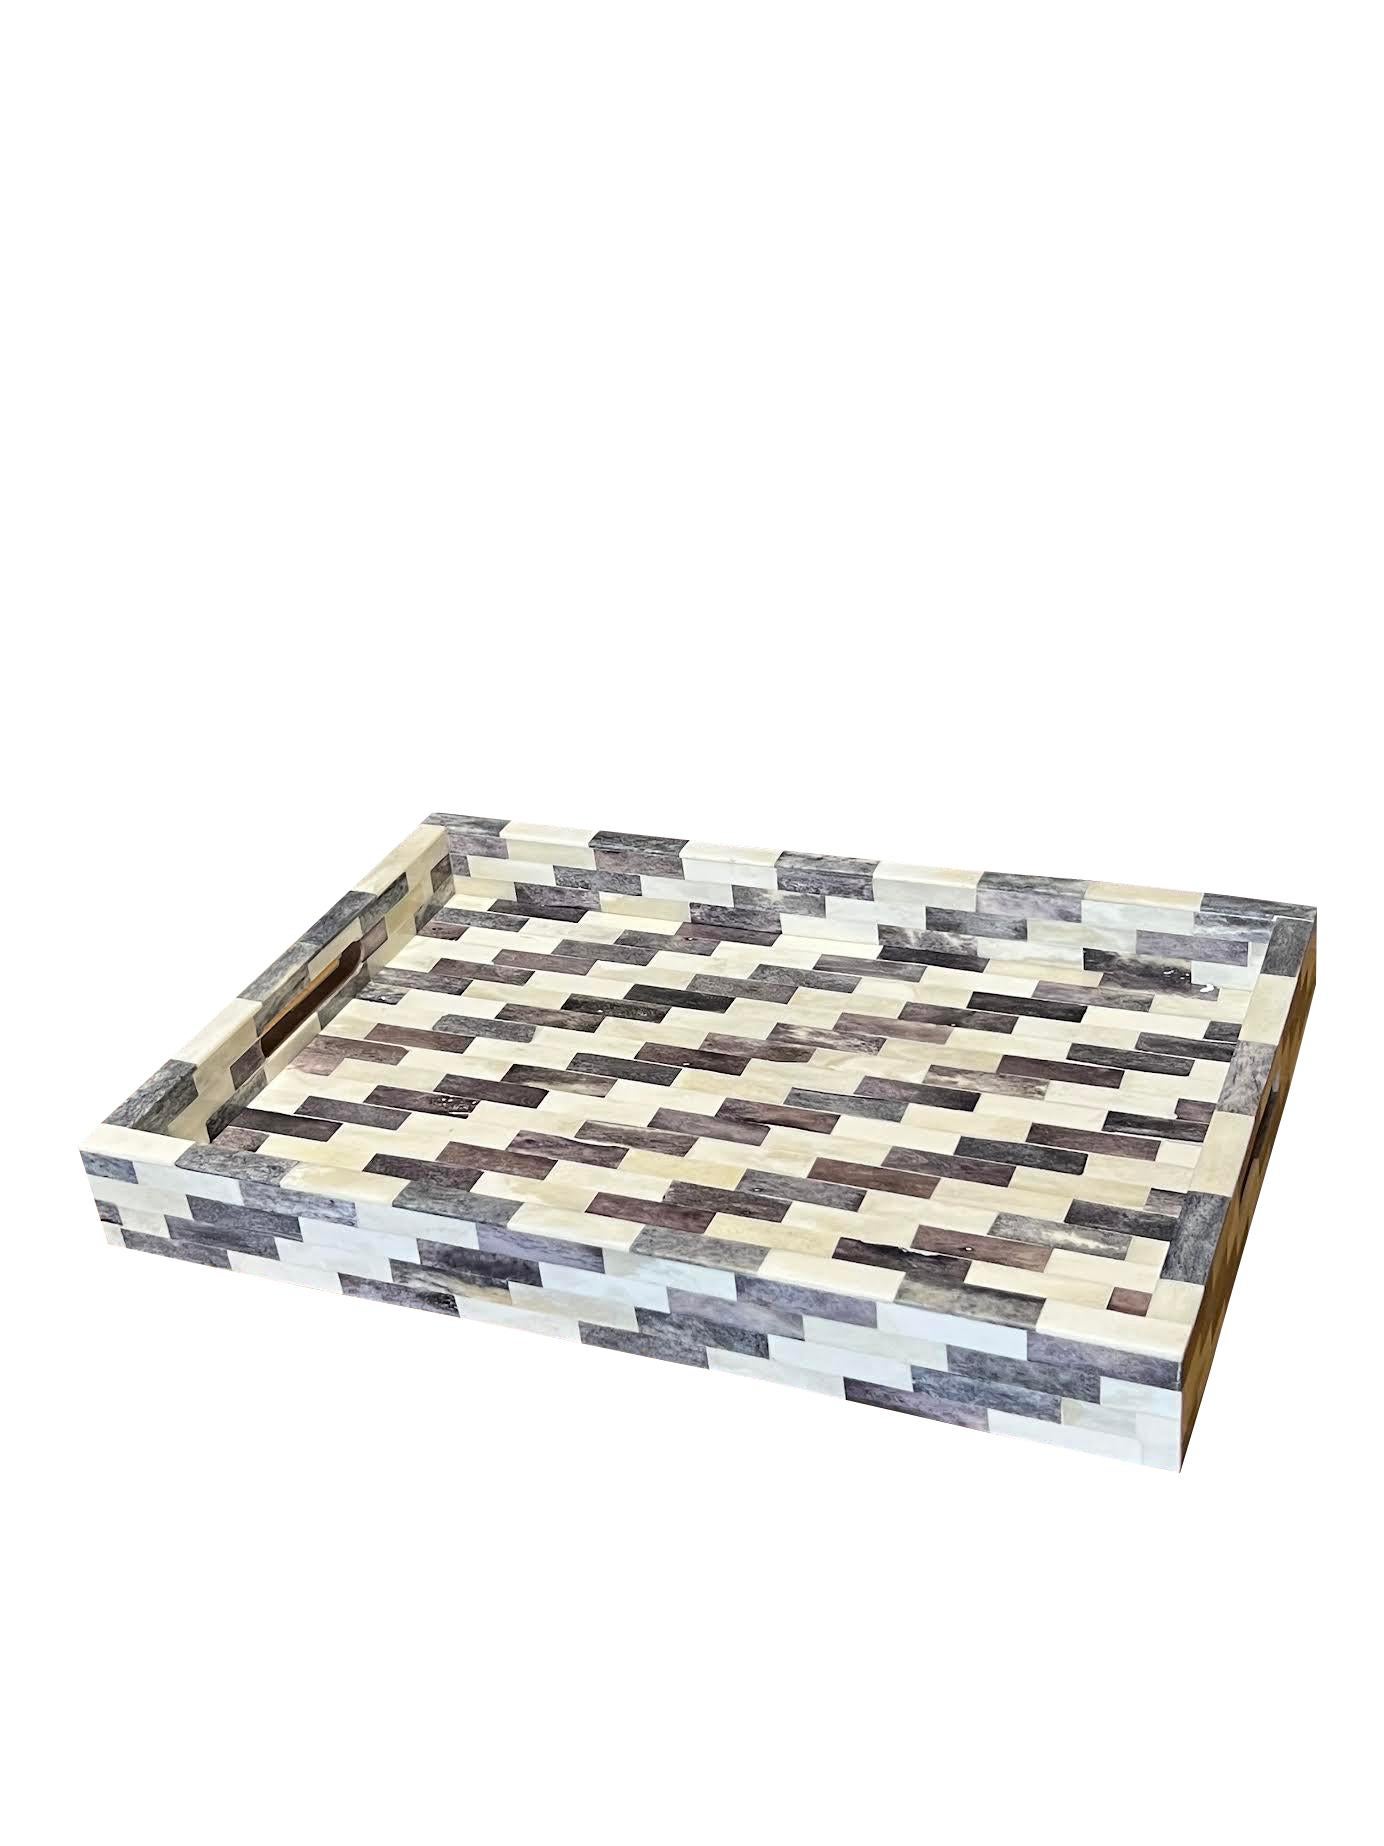 Contemporary Indian grey and cream geometric design bone tray with cut out handles.
Part of a large collection of bone trays and boxes